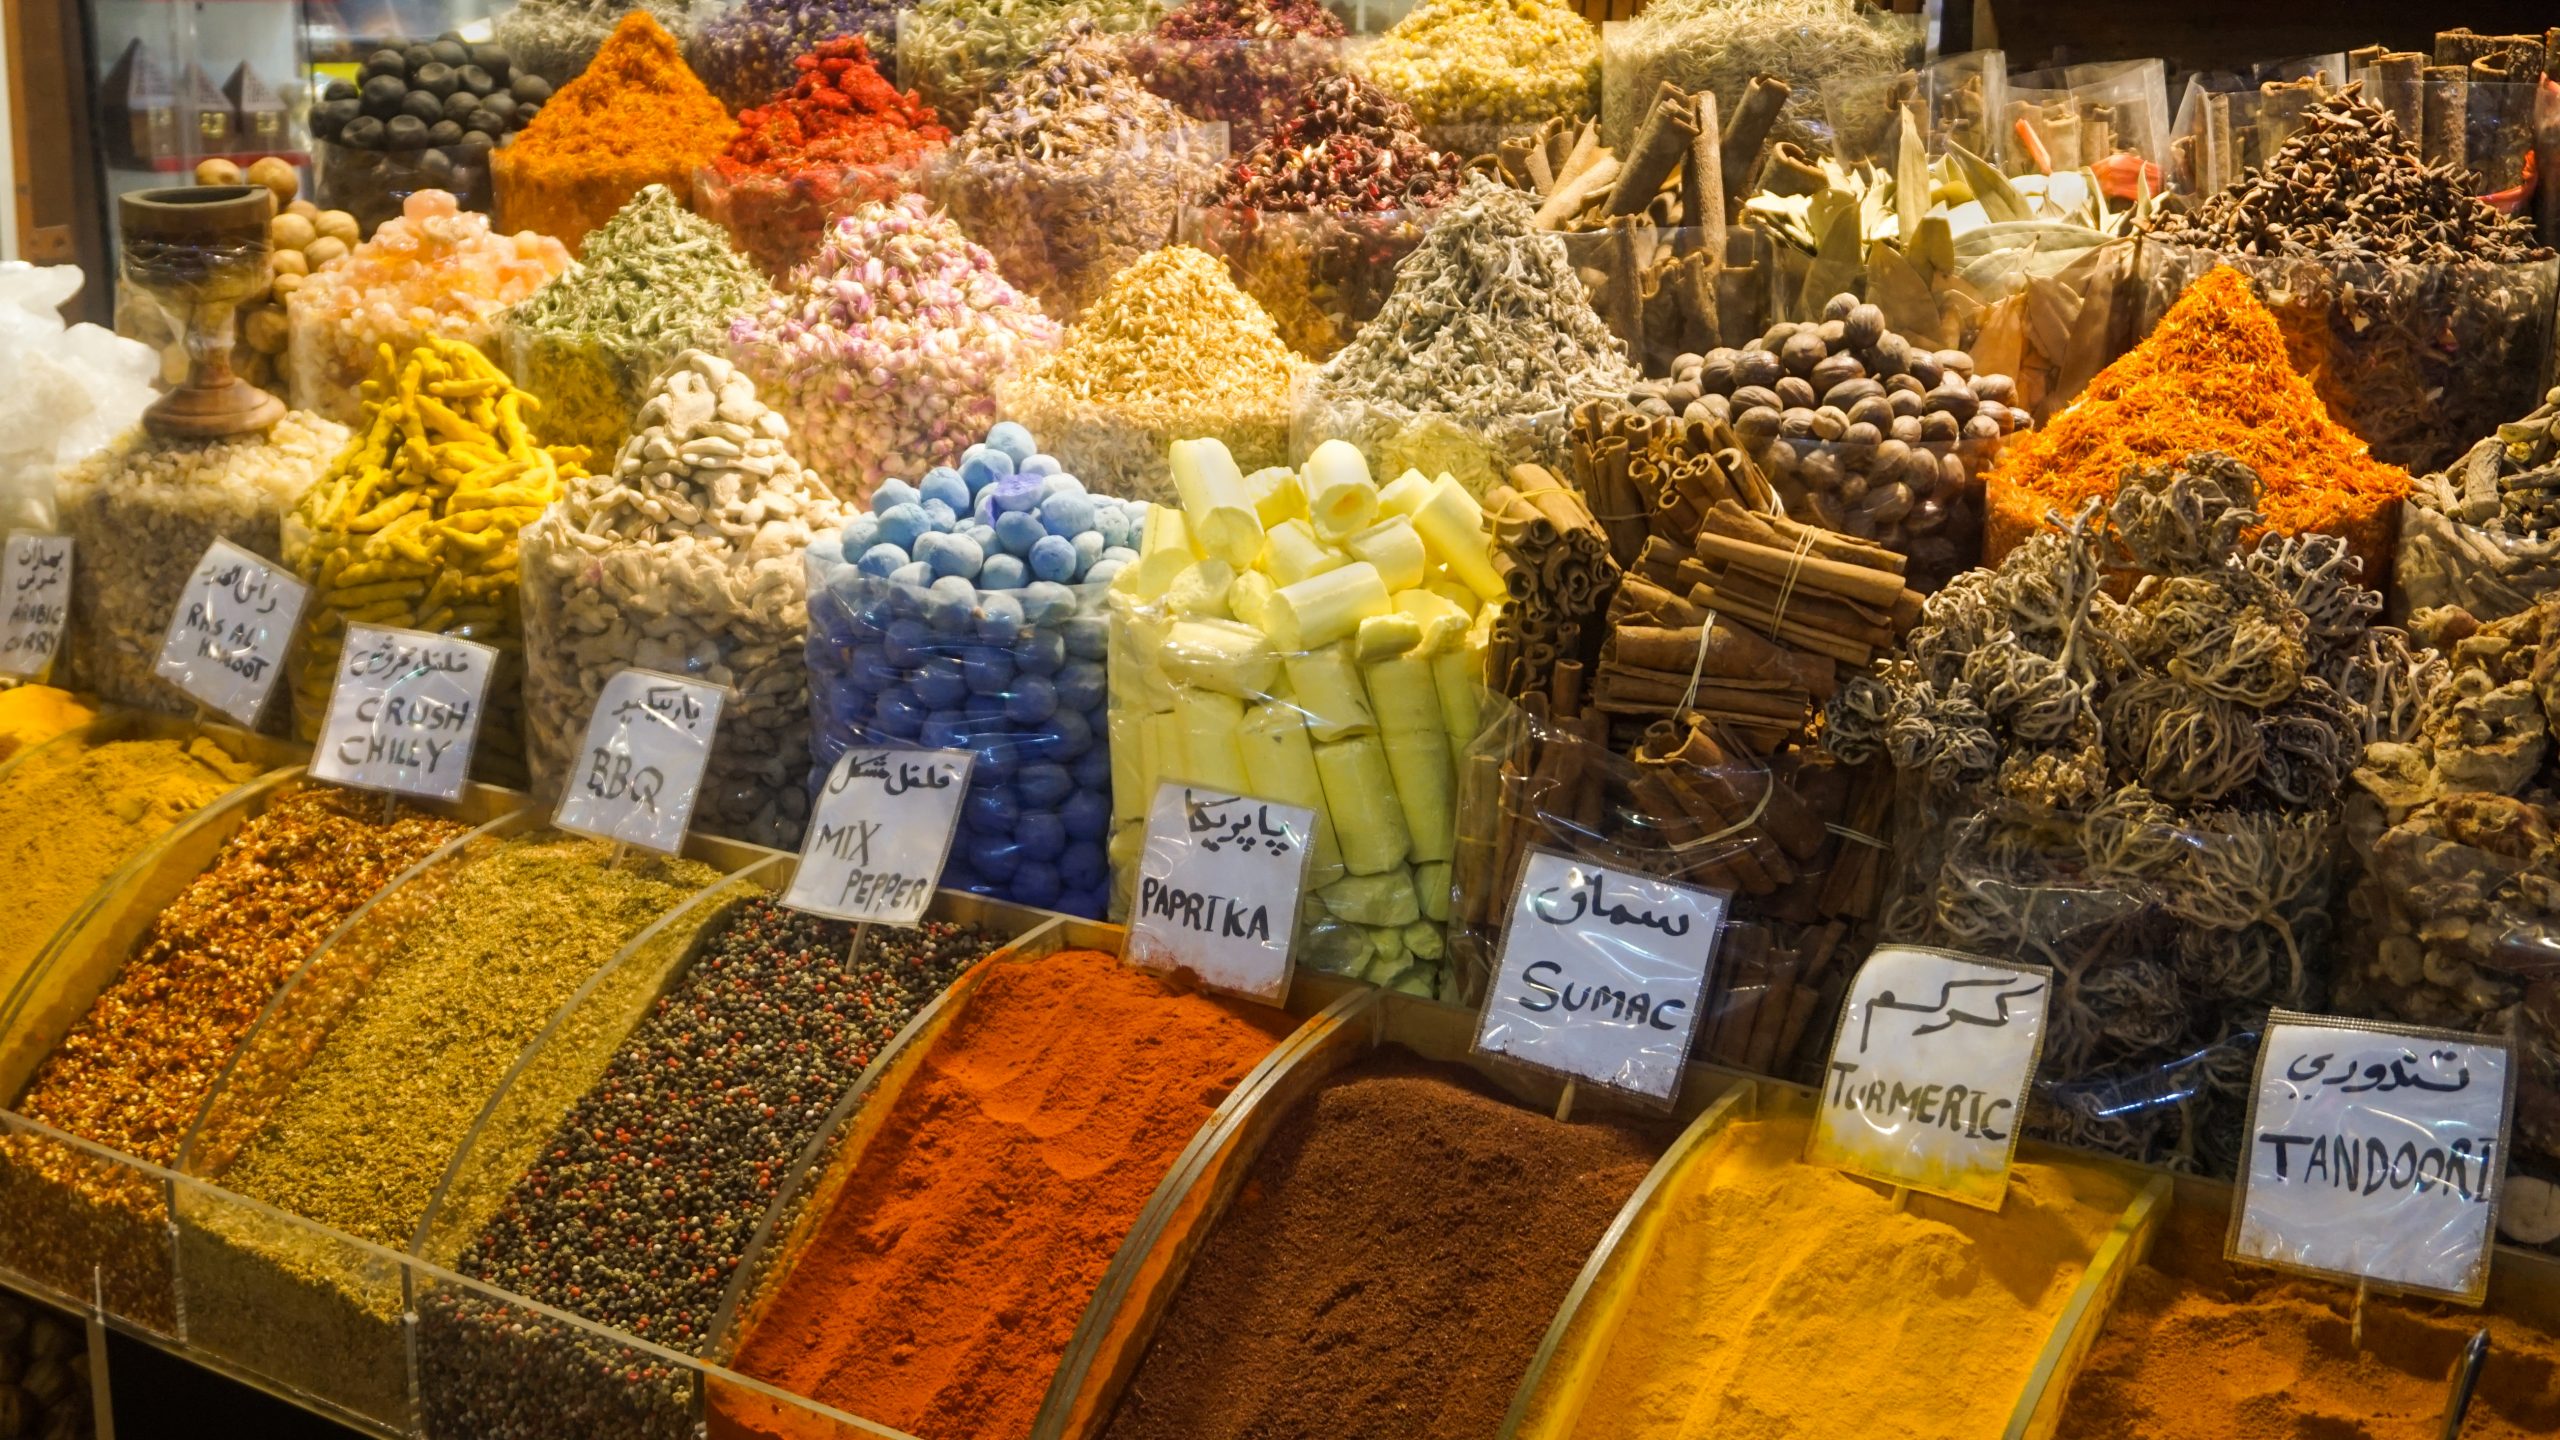 A display of different spices from the Spice Souk in Deira